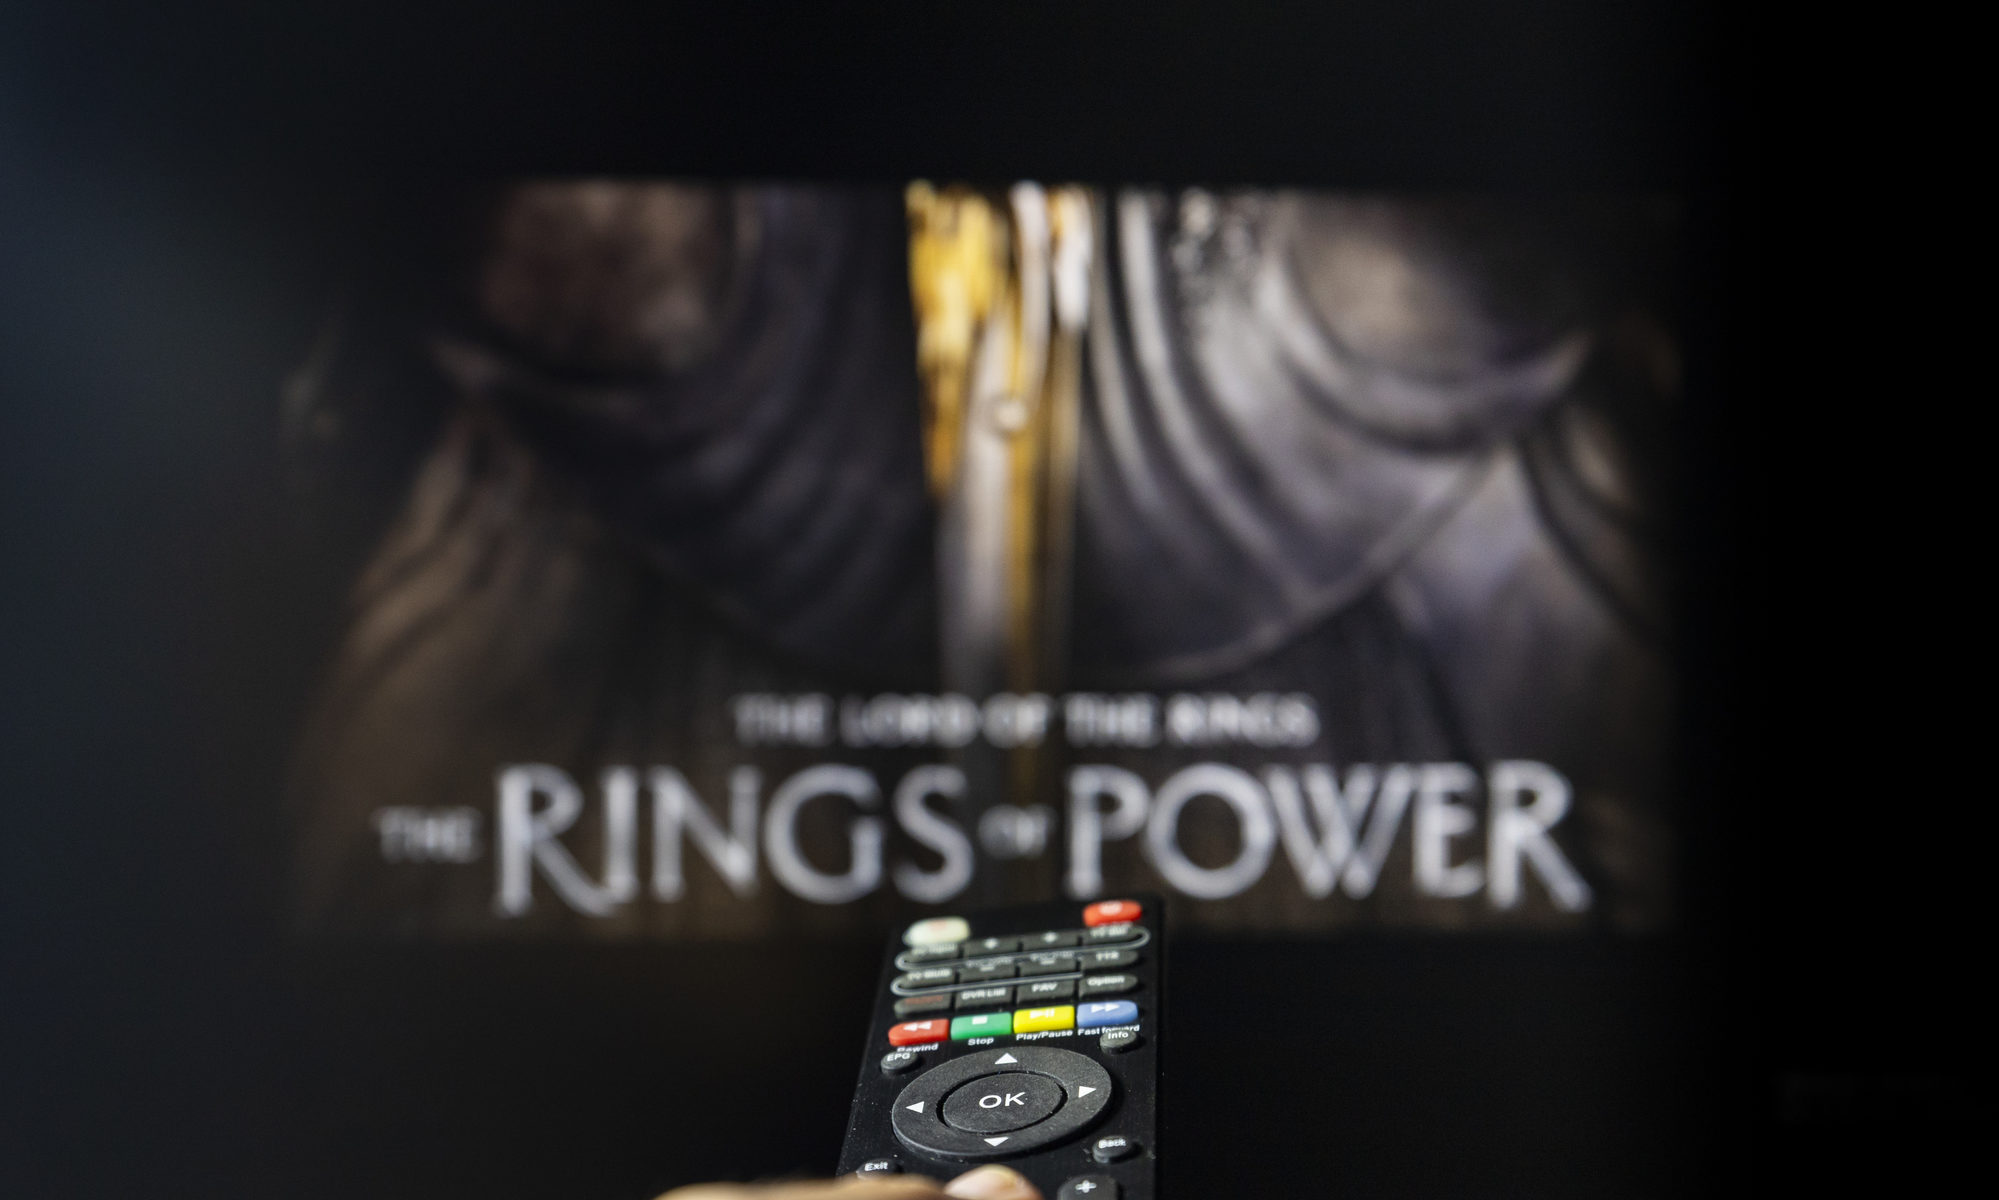 photograph of The Rings of Power TV series on TV with remote control in hand